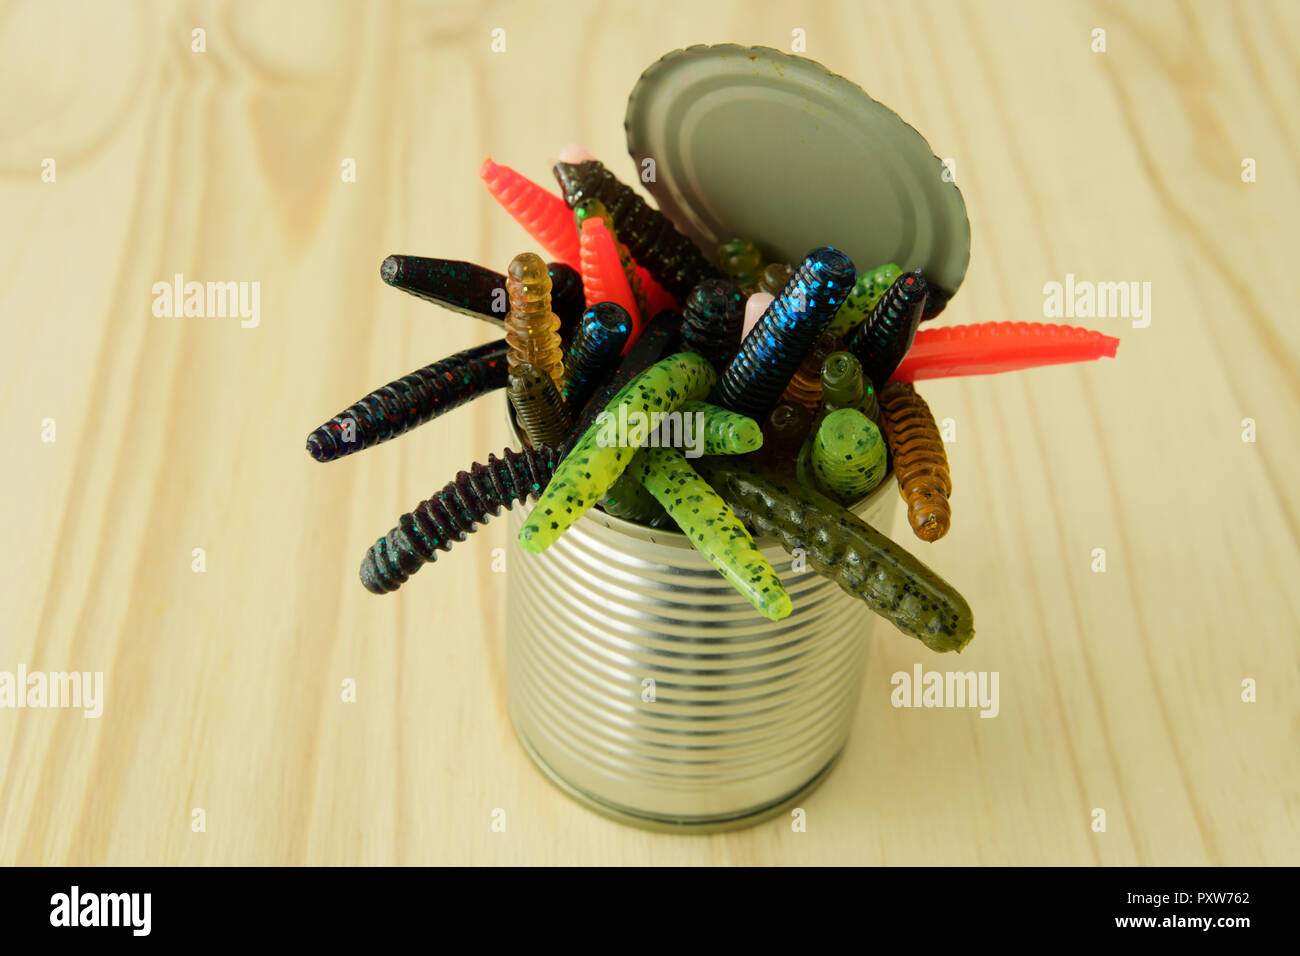 Close-up, detail, opening can of worms, artificial plastic worm-like creatures crawling out of tin on wooden background, objects Stock Photo